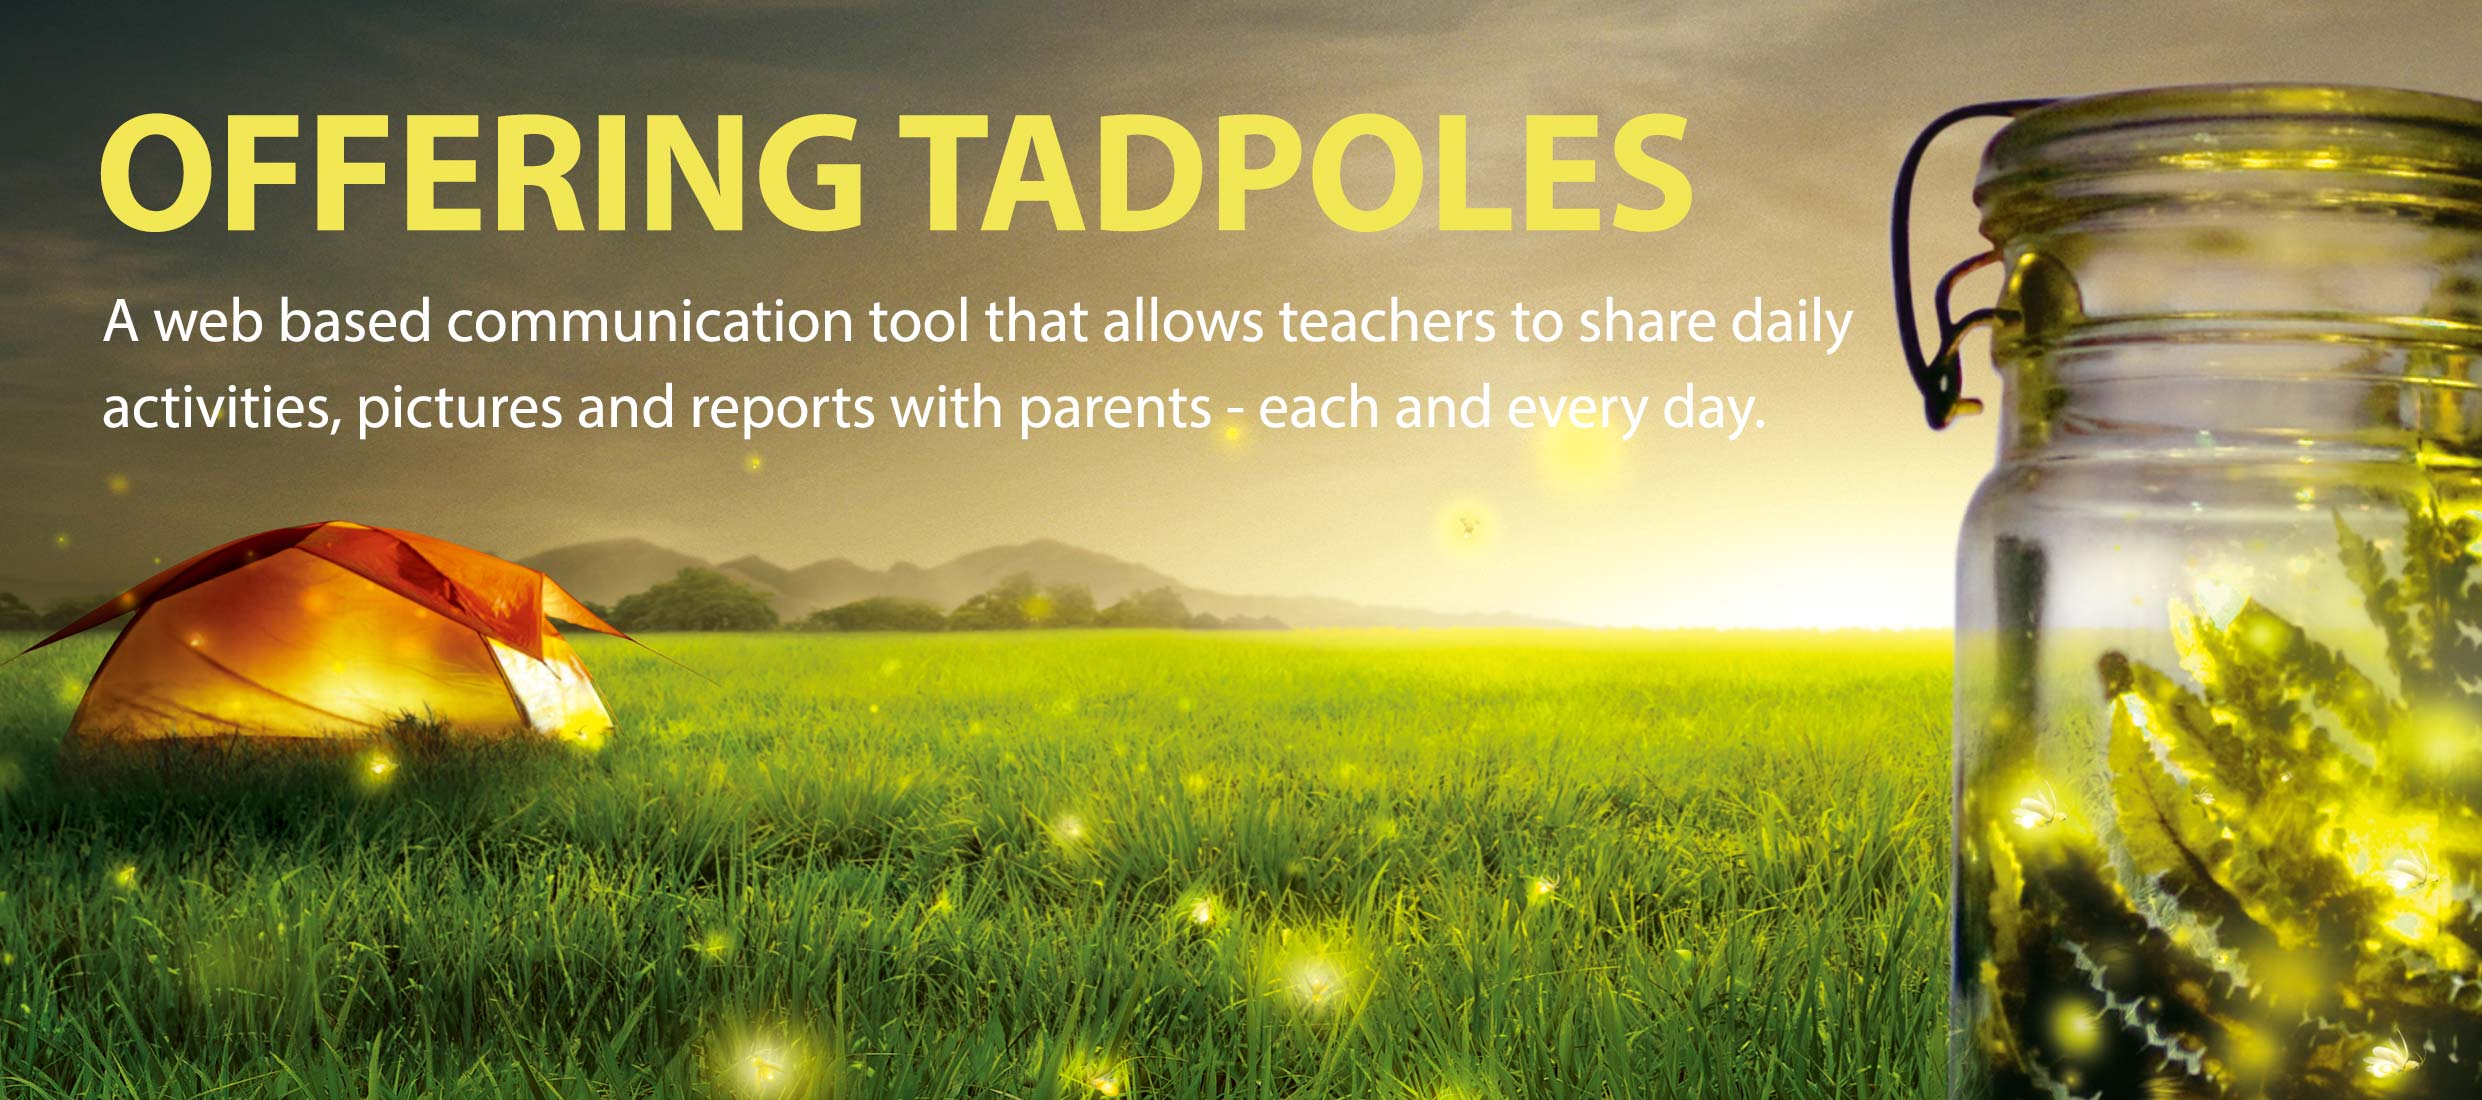 OFFERING TADPOLES : A web based communication tool that allows teachers to share daily activities, pictures and reports with parents - each and every day.